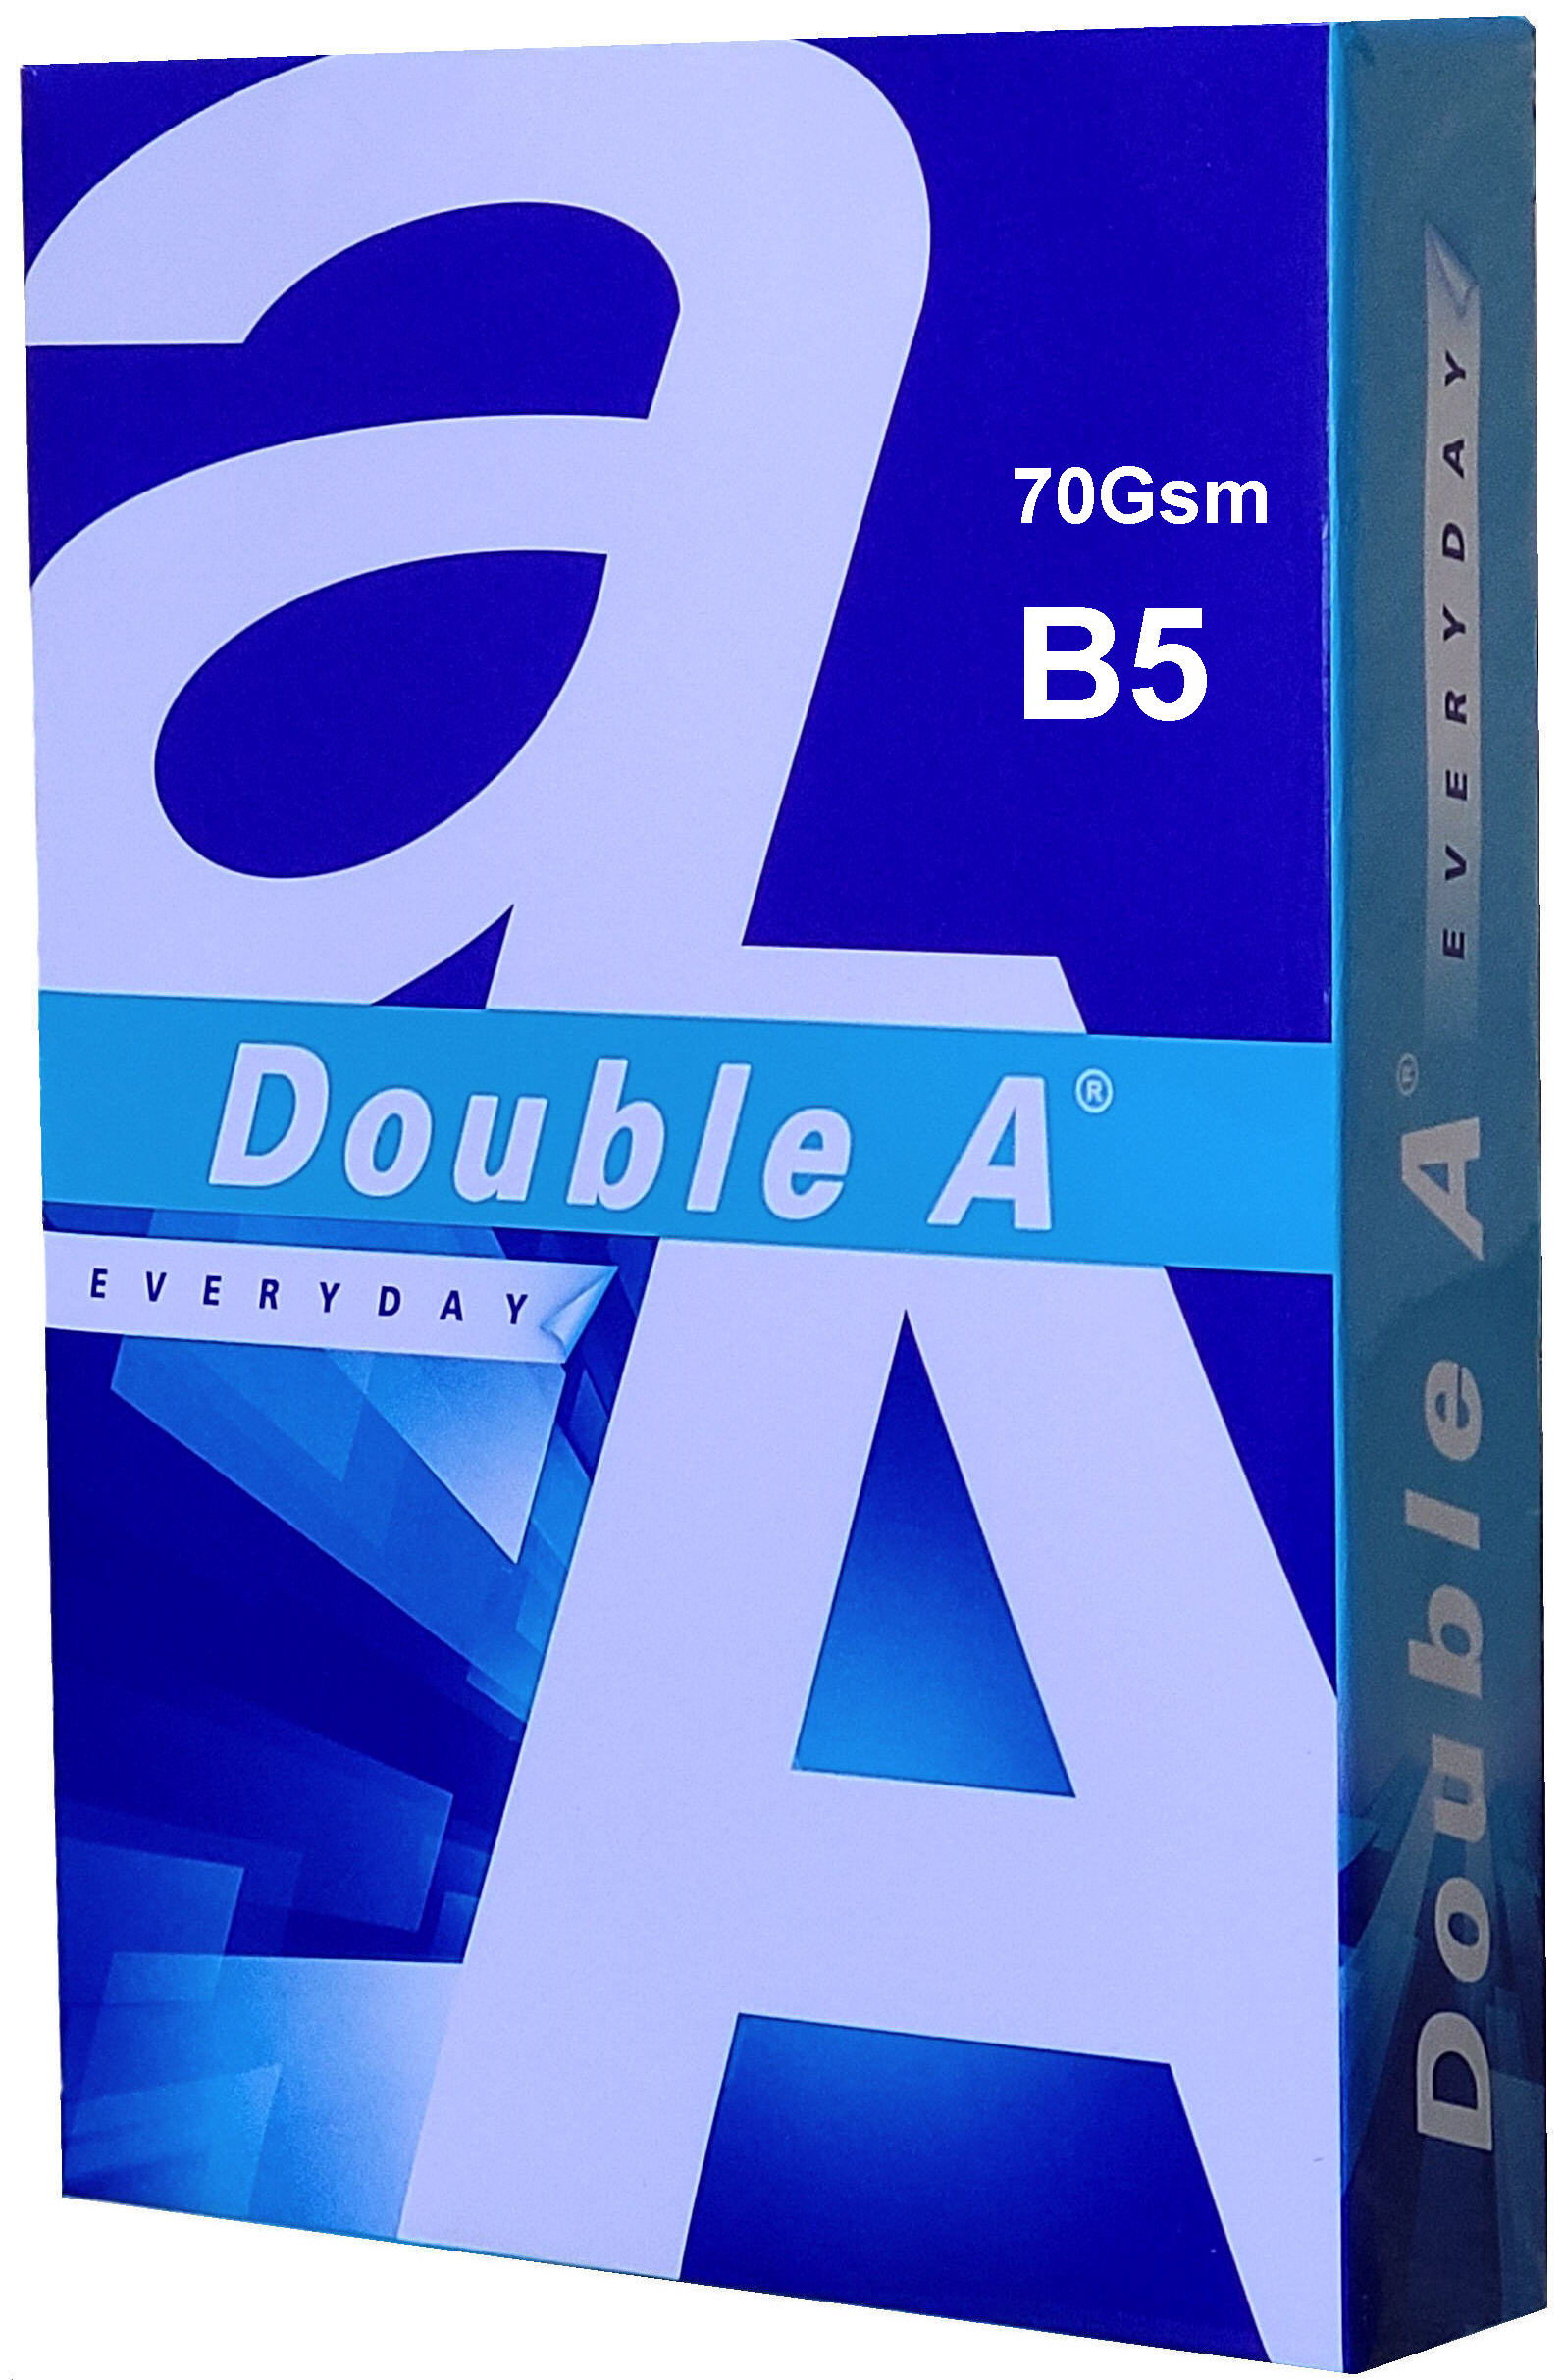 Double A 70Gsm B5